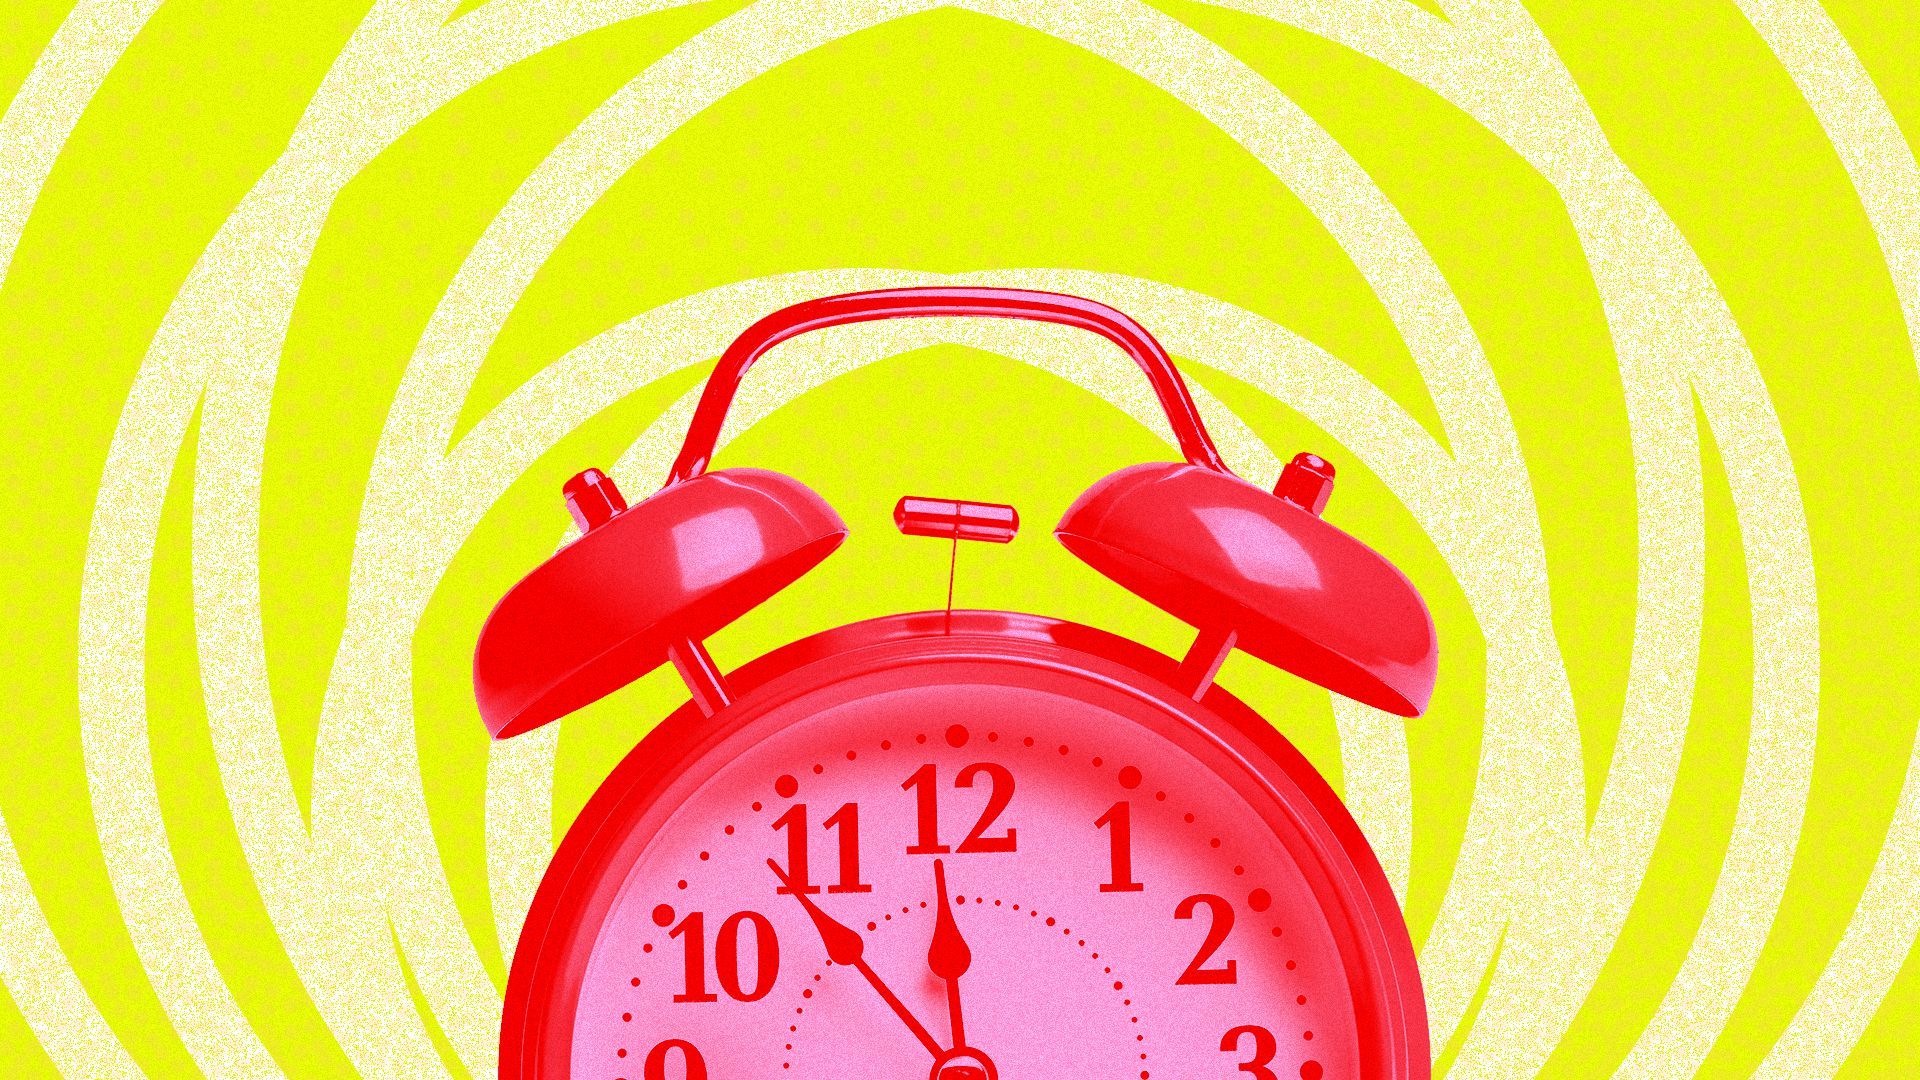 Illustration of a red alarm clock with graphic shapes in the background